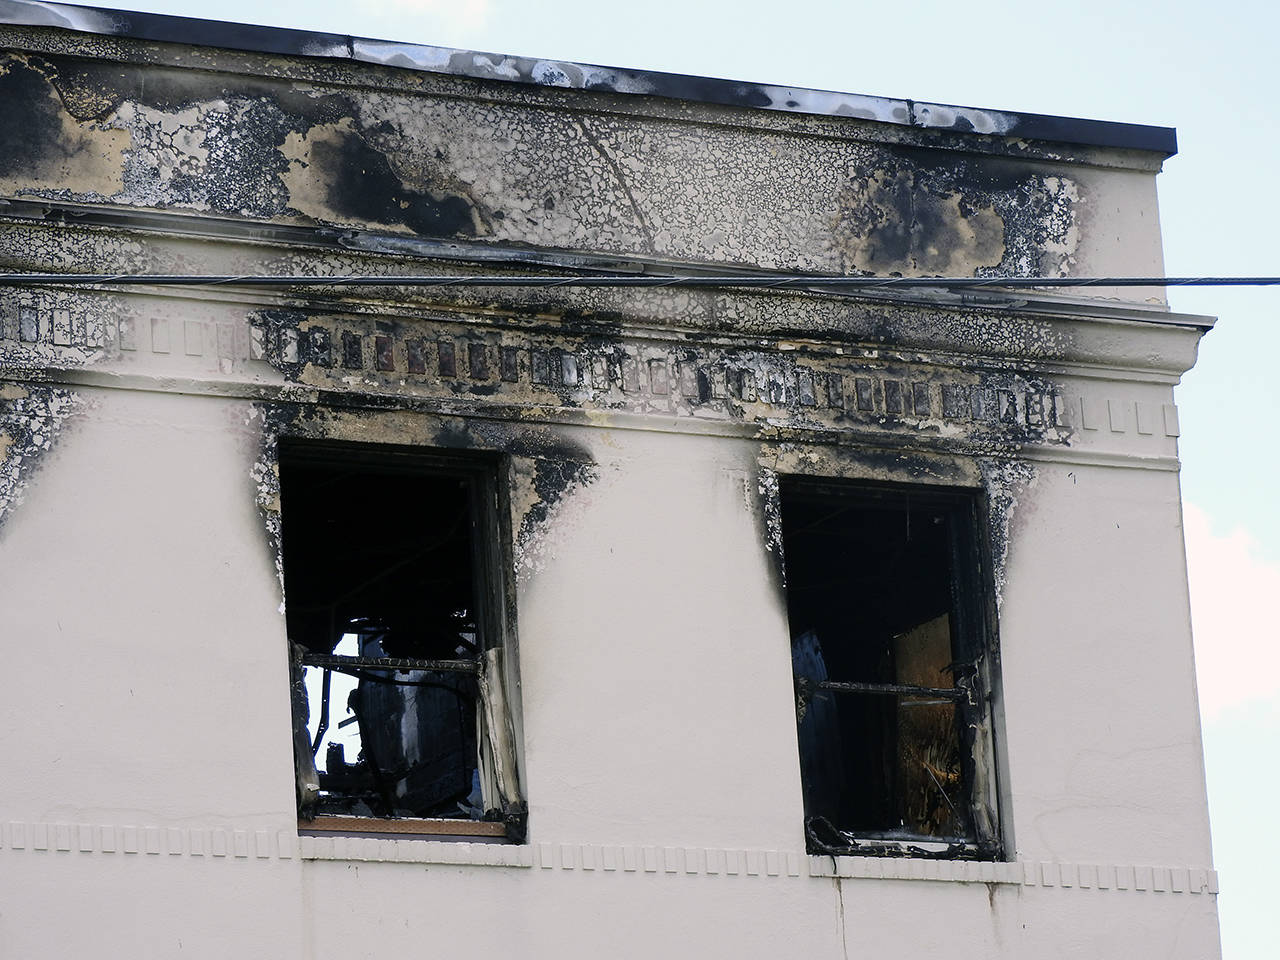 (Kat Bryant | The Daily World) Flames shot out of these upper windows at the northeast corner of the building.